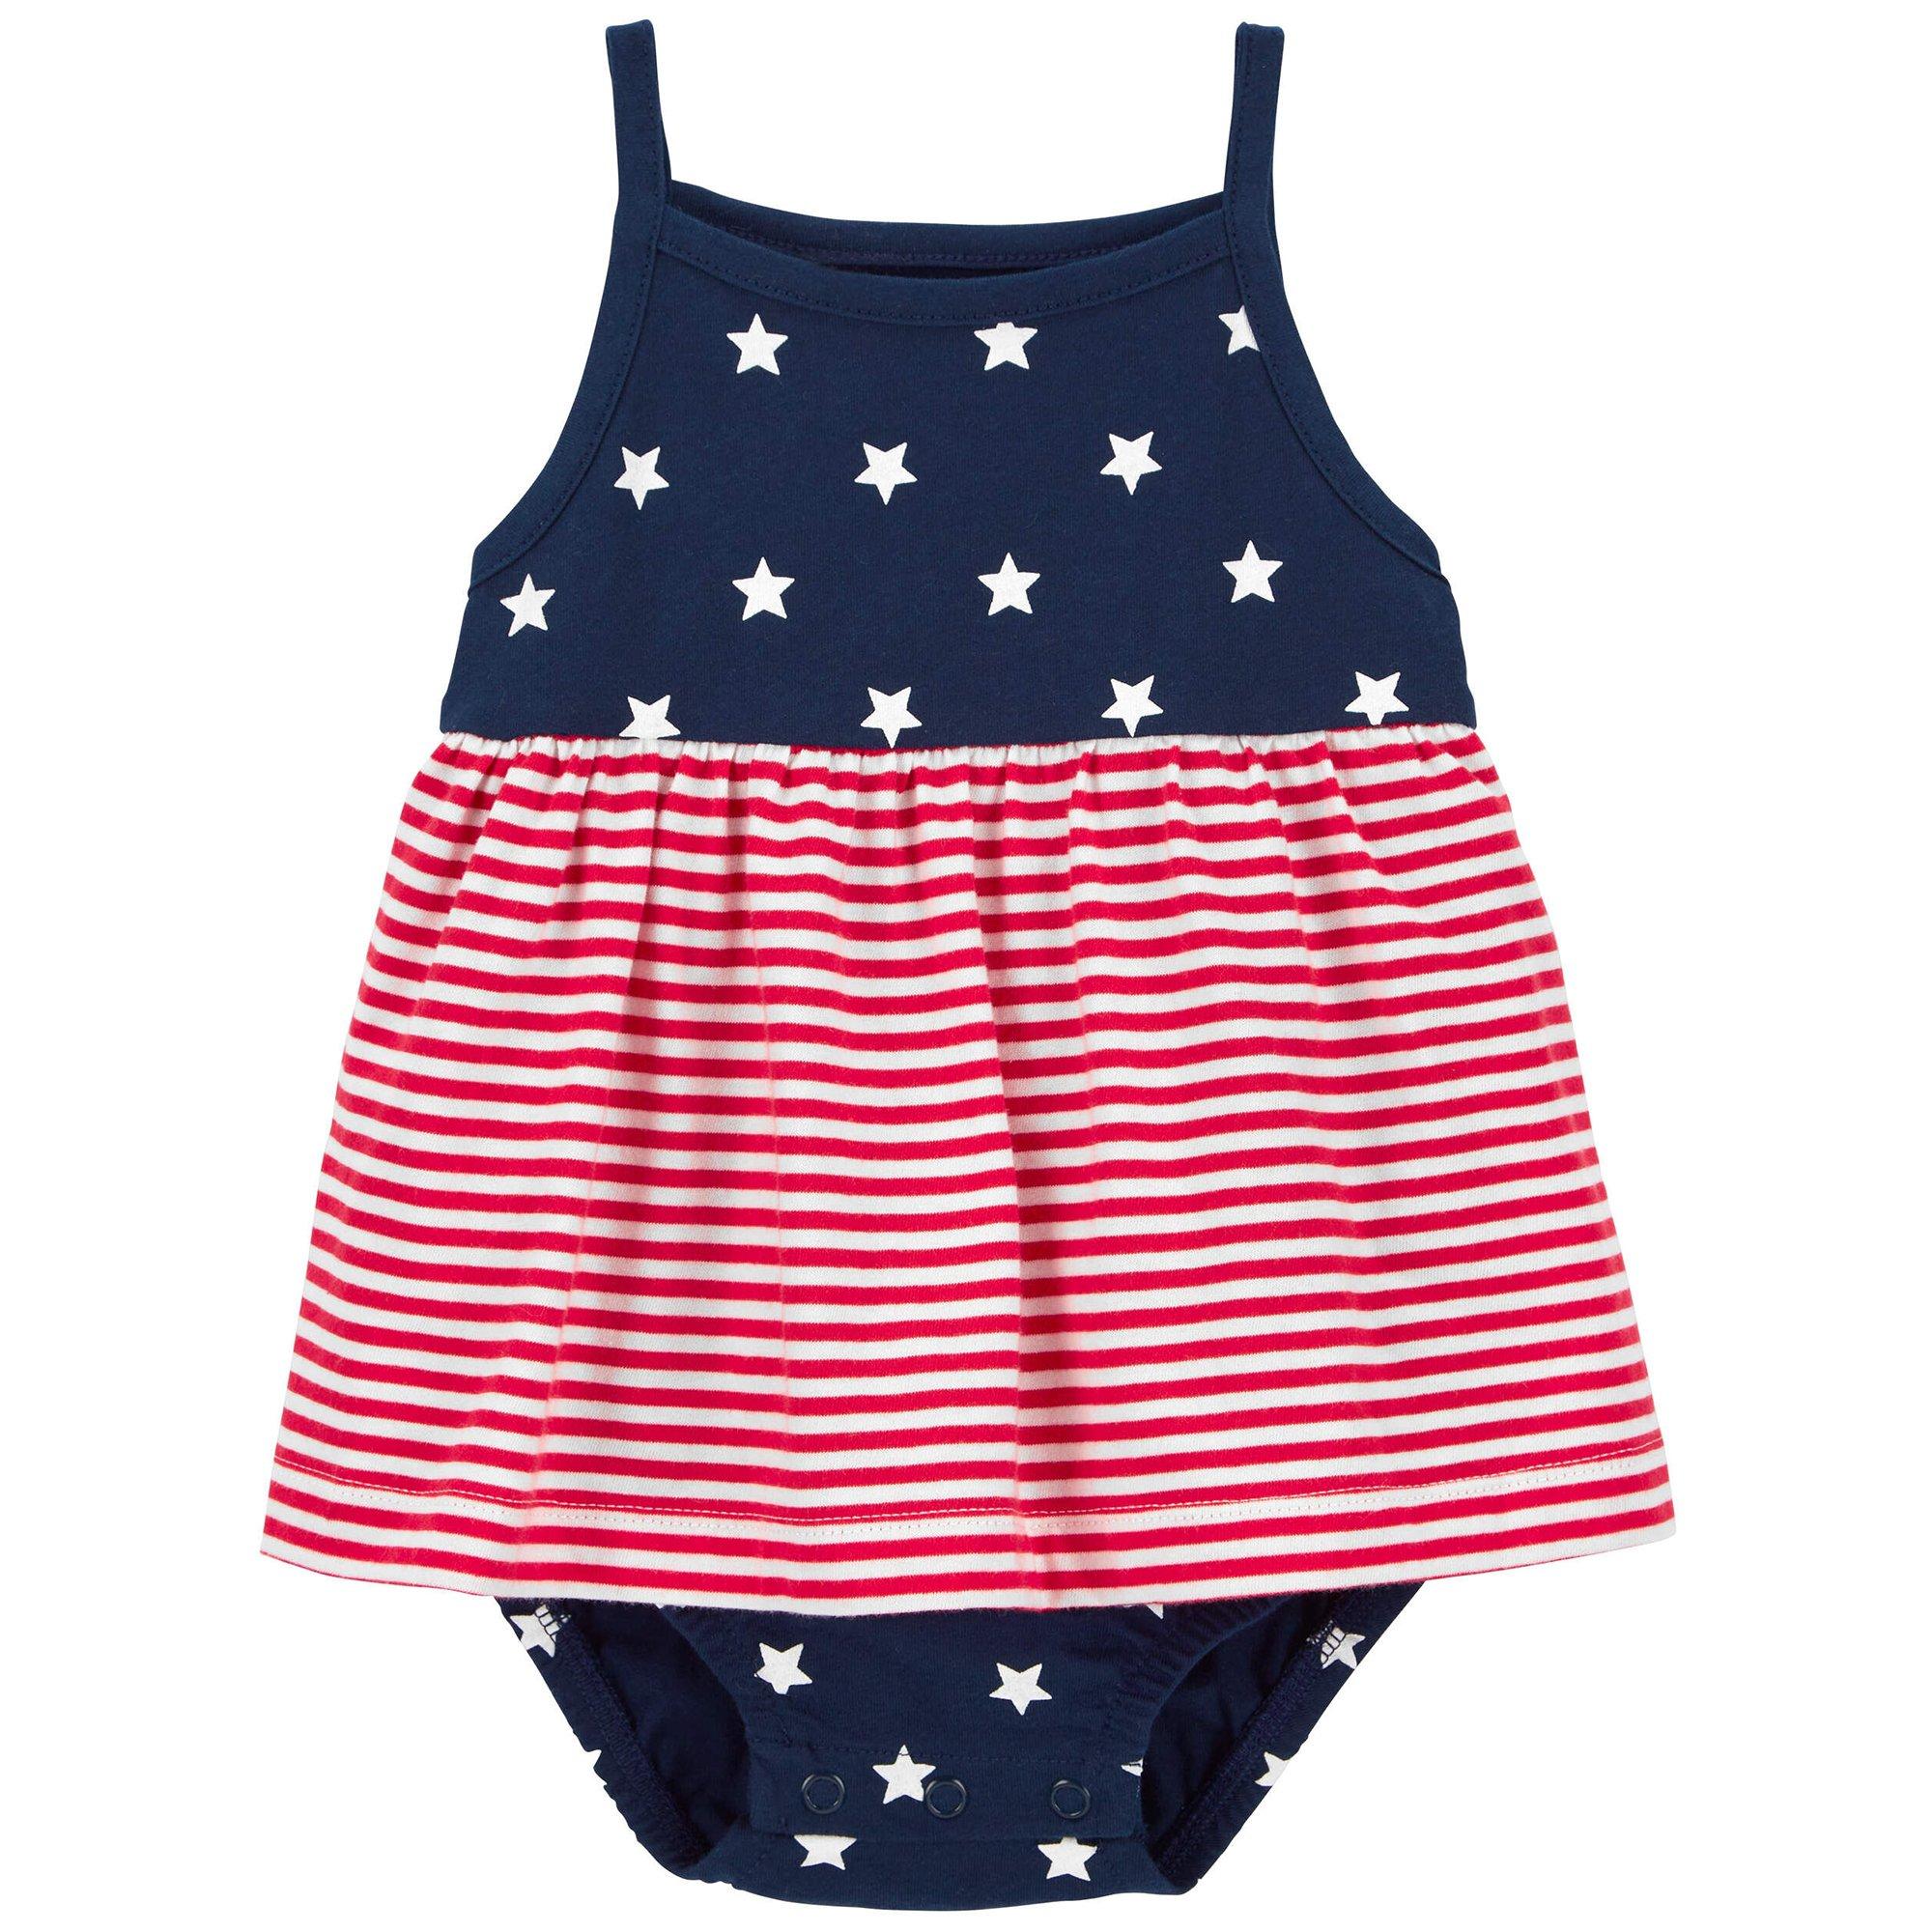 Carters Baby Girls Fourth Of July Sunsuit